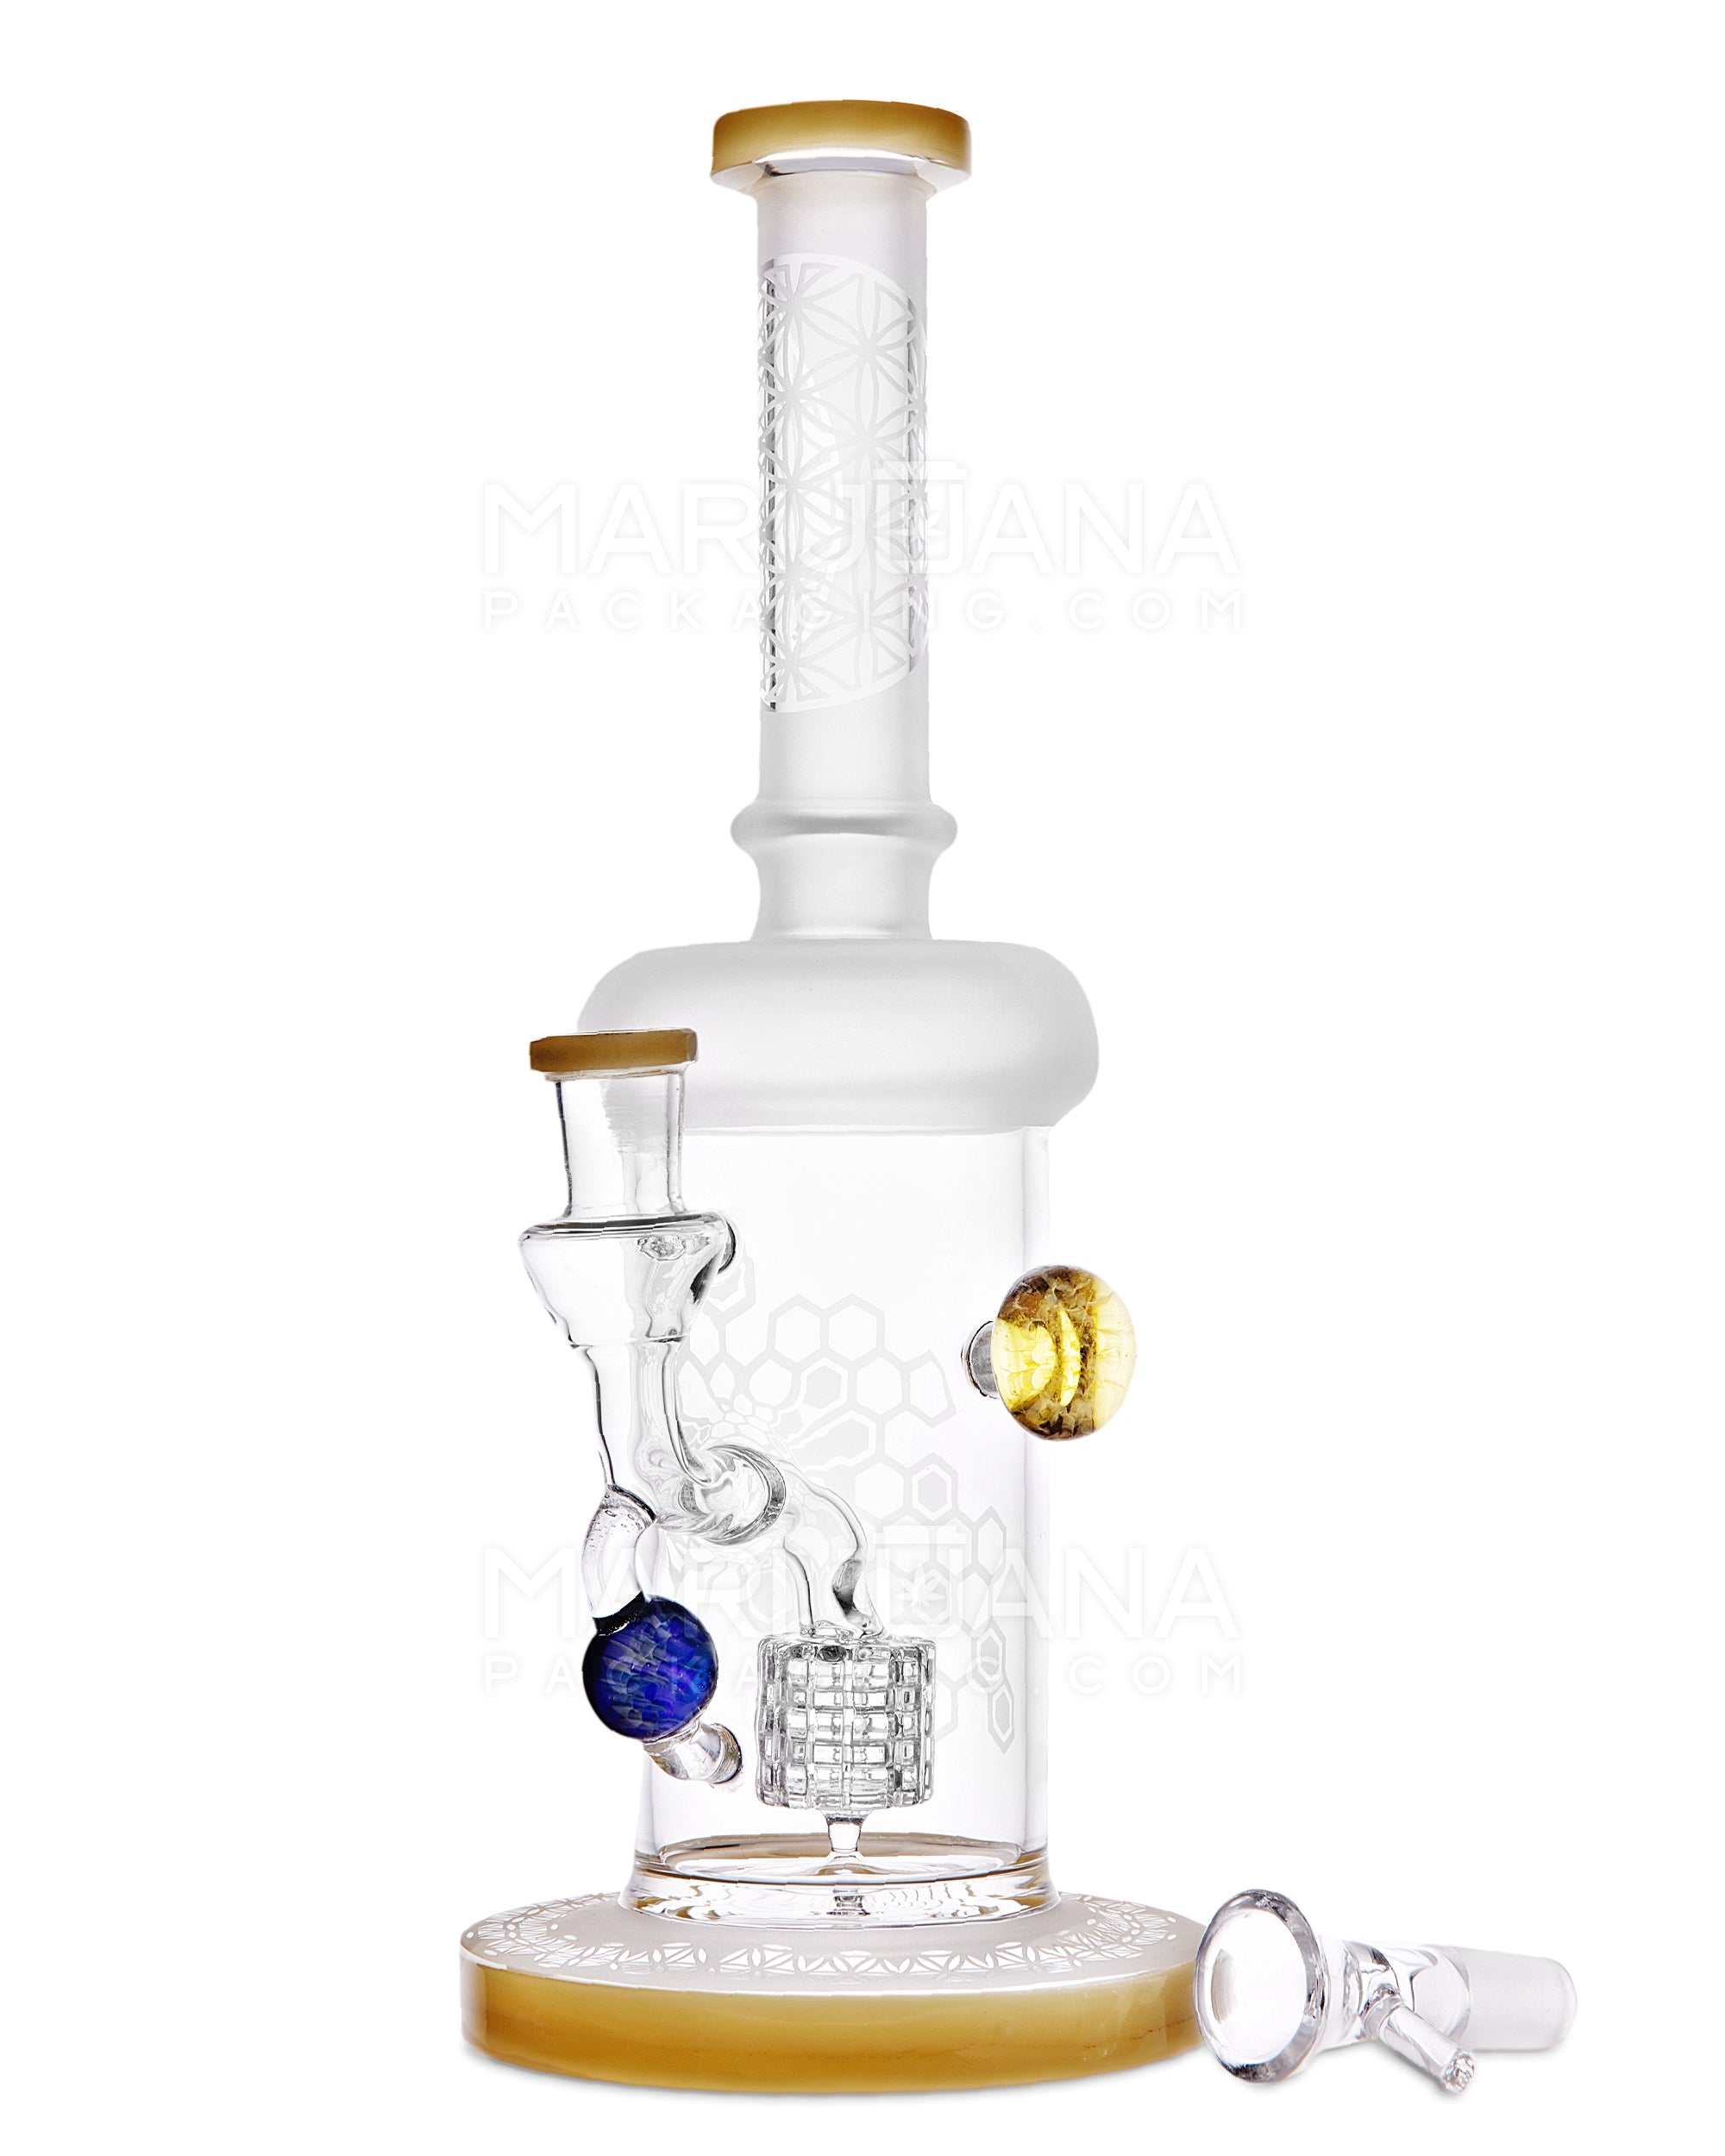 USA Glass | Straight Neck Matrix Perc Sandblasted Glass Water Pipe w/ Implosion Marbles | 11in Tall - 14mm Bowl - Yellow - 2